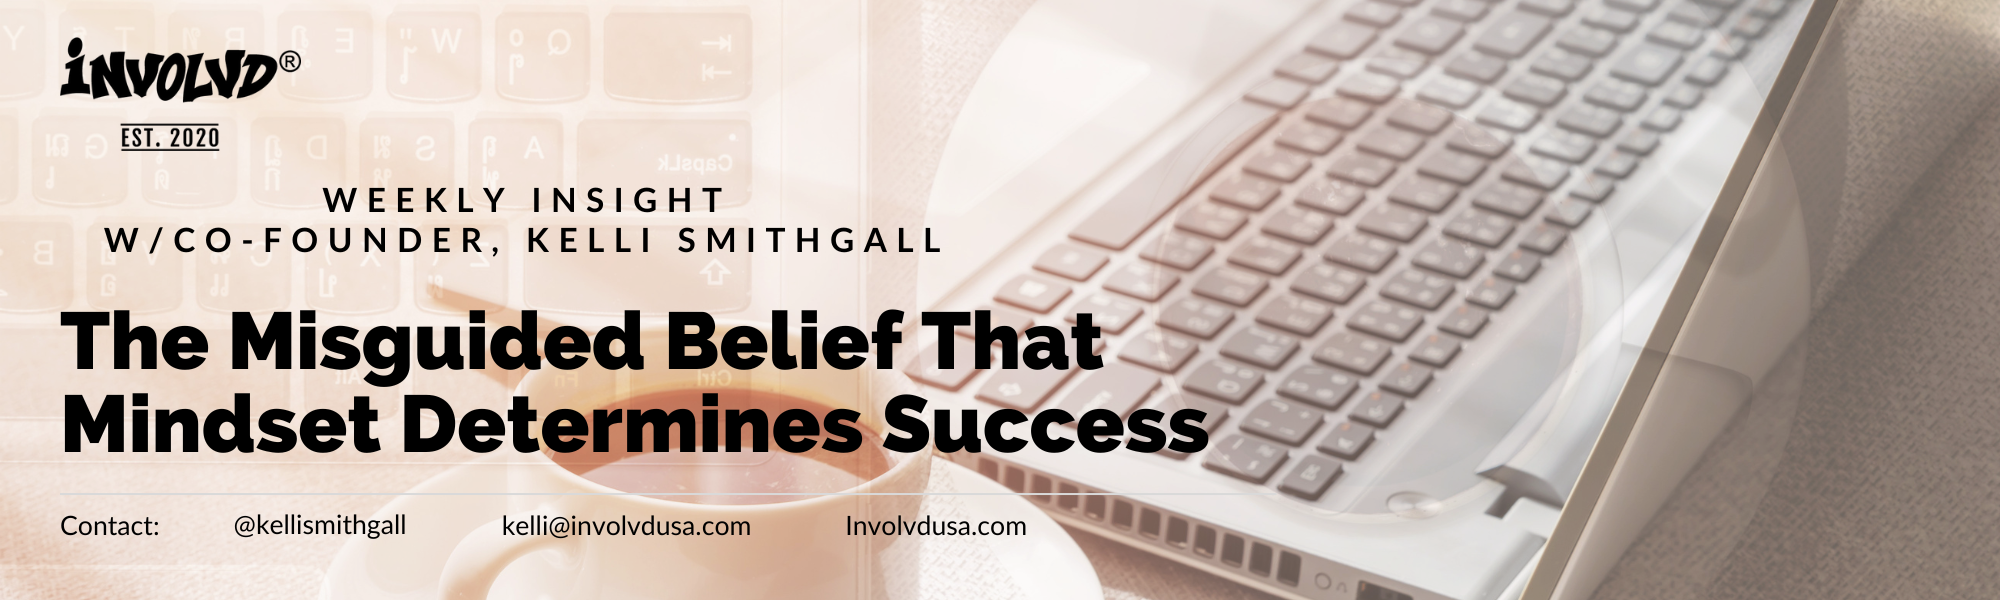 Involvd® Blog Weekly Insight with Co-Founder Kelli Smithgall_The Misguided Belief That Mindset Determines Success